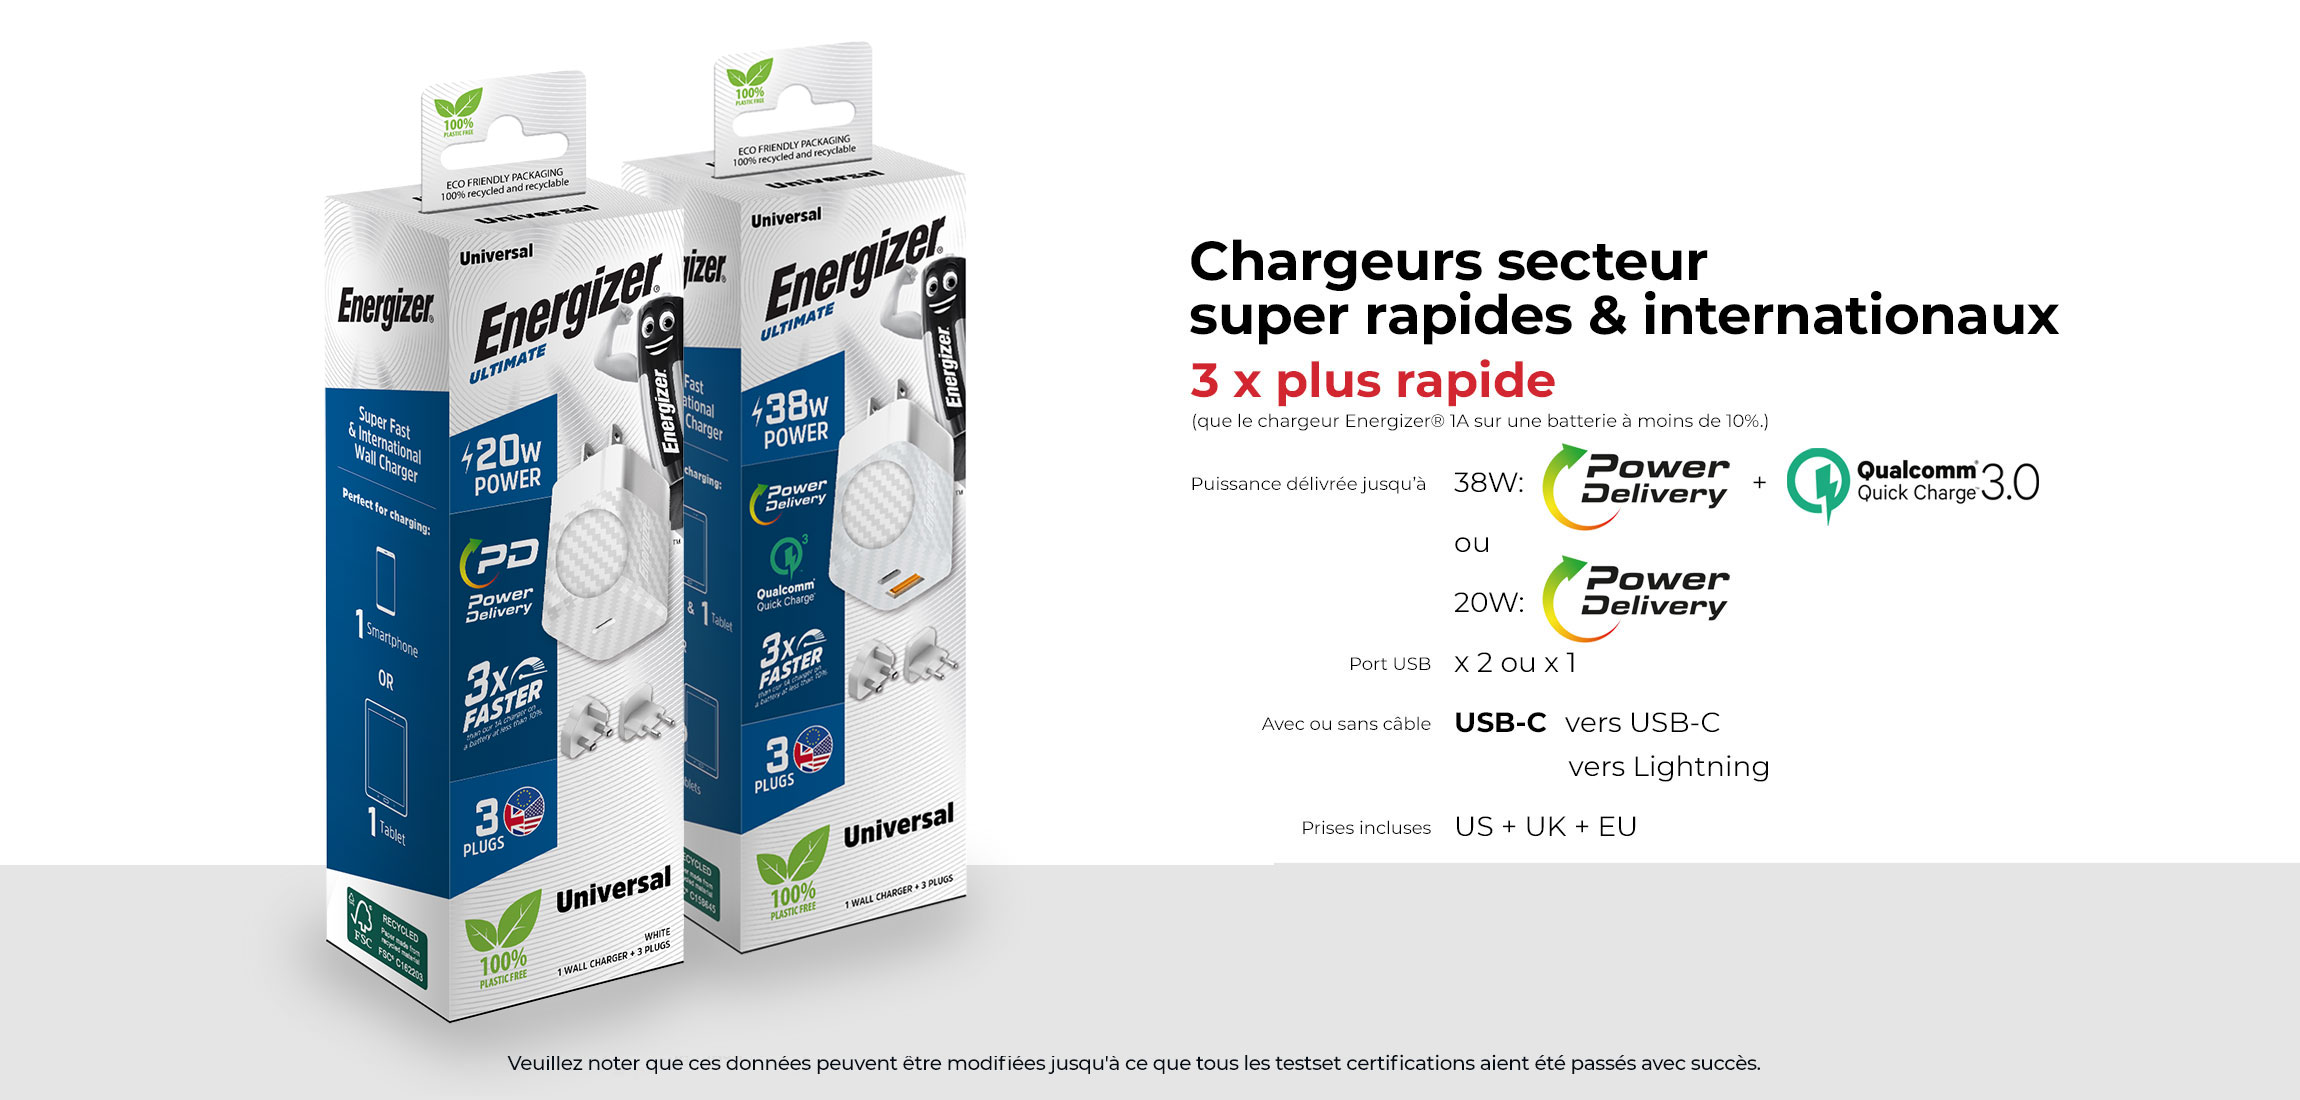 AT-wall-chargers-PD-QC-pack-FR.jpg